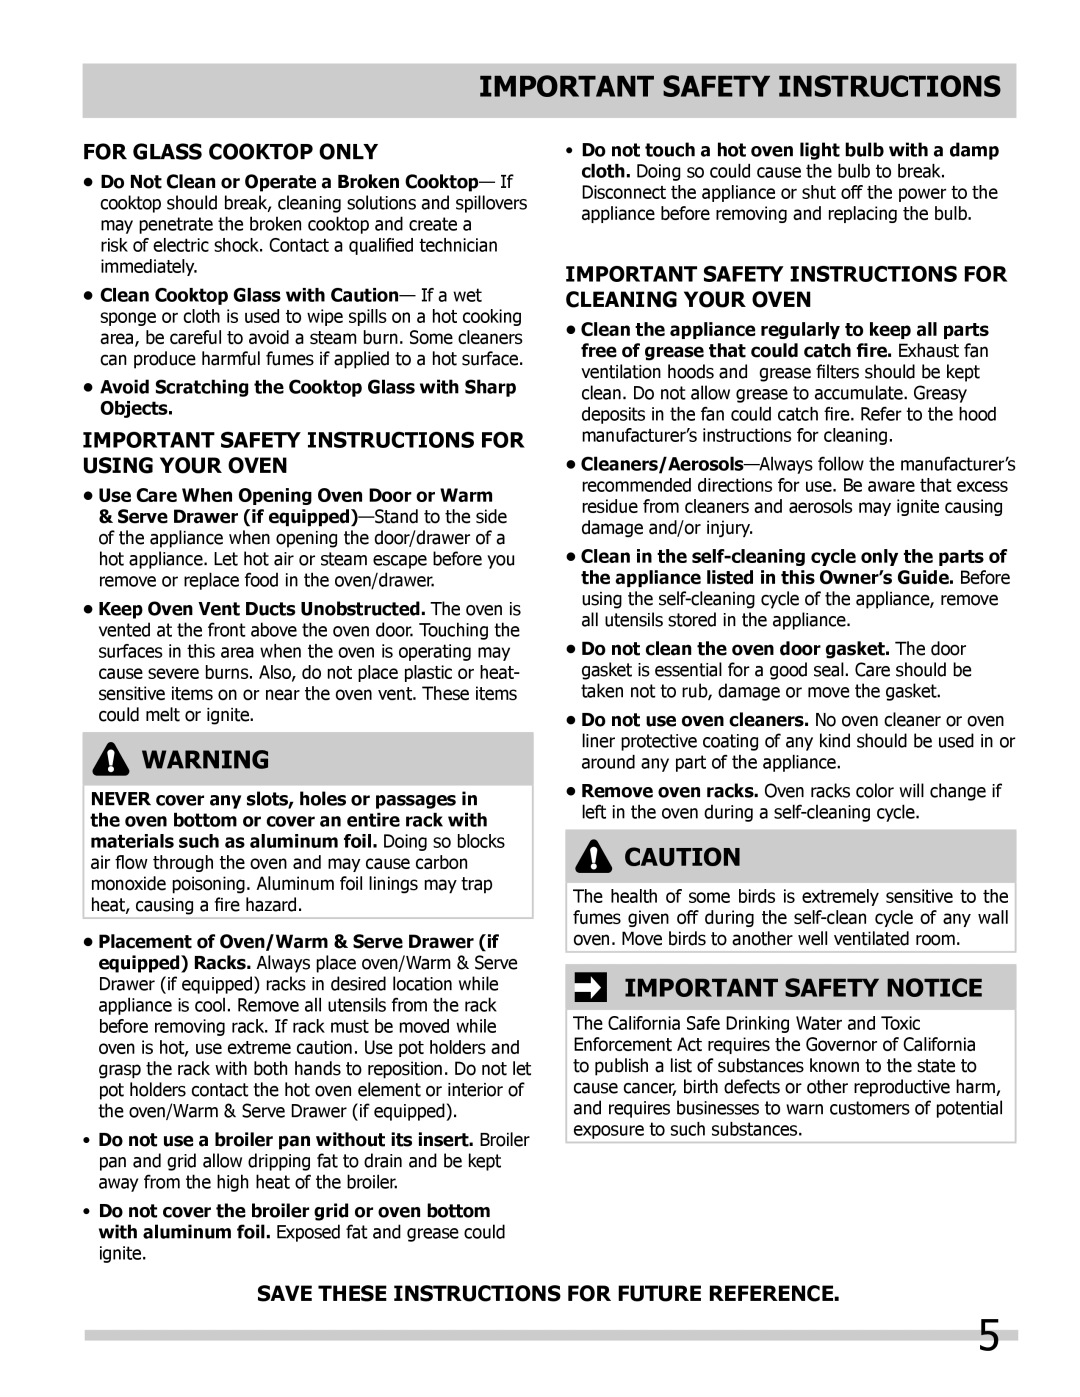 Frigidaire L5V3E4 Important Safety Notice, For Glass Cooktop Only, Important Safety Instructions For Using Your Oven 